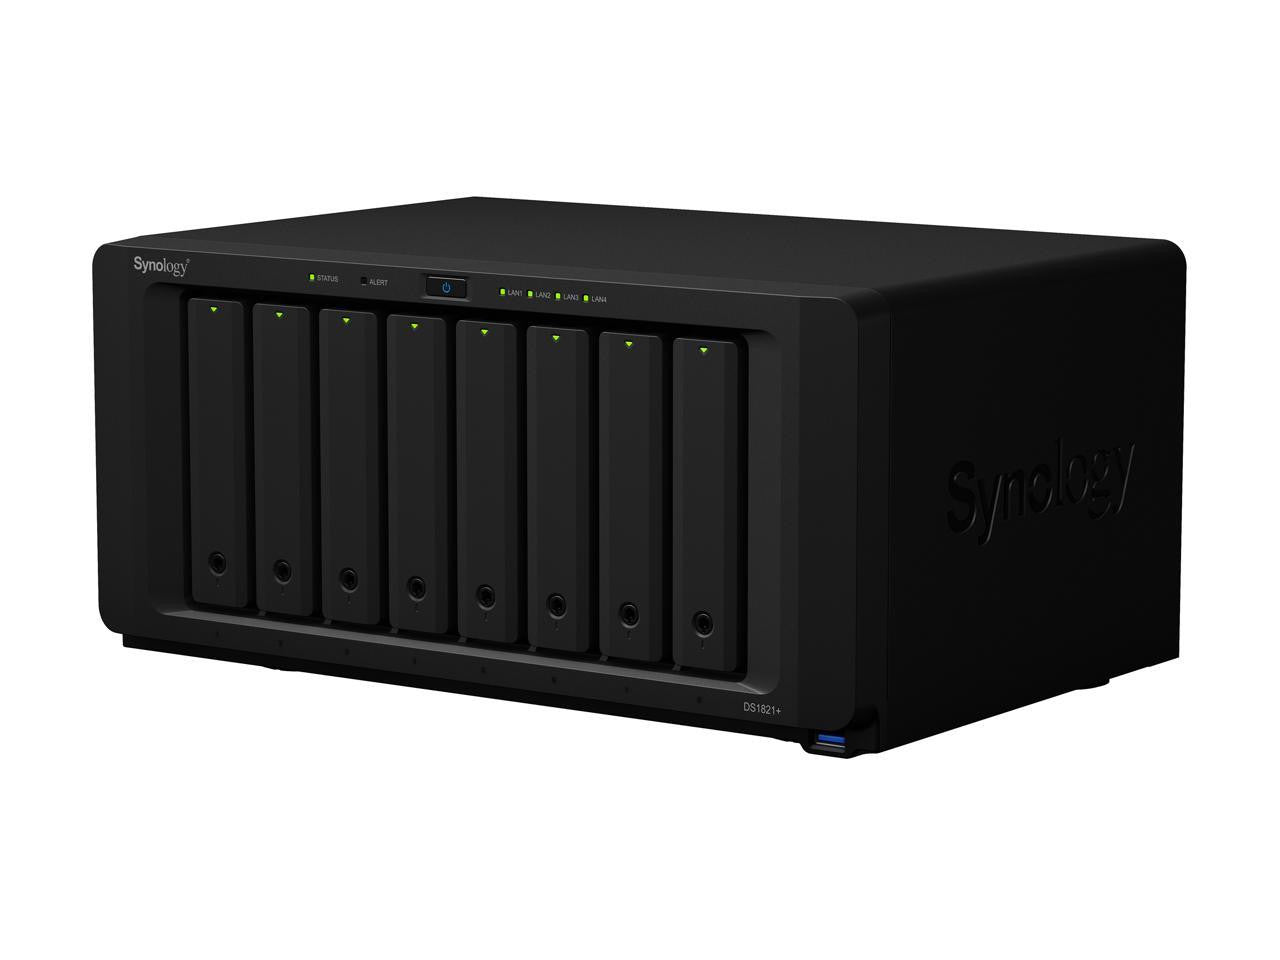 Synology DS1821+ 8-BAY DiskStation with 16GB RAM, 800GB (2x400GB) Cache and 128TB (8 x 16TB) of Synology Enterprise HAT5300 Drives Fully Assembled and Tested